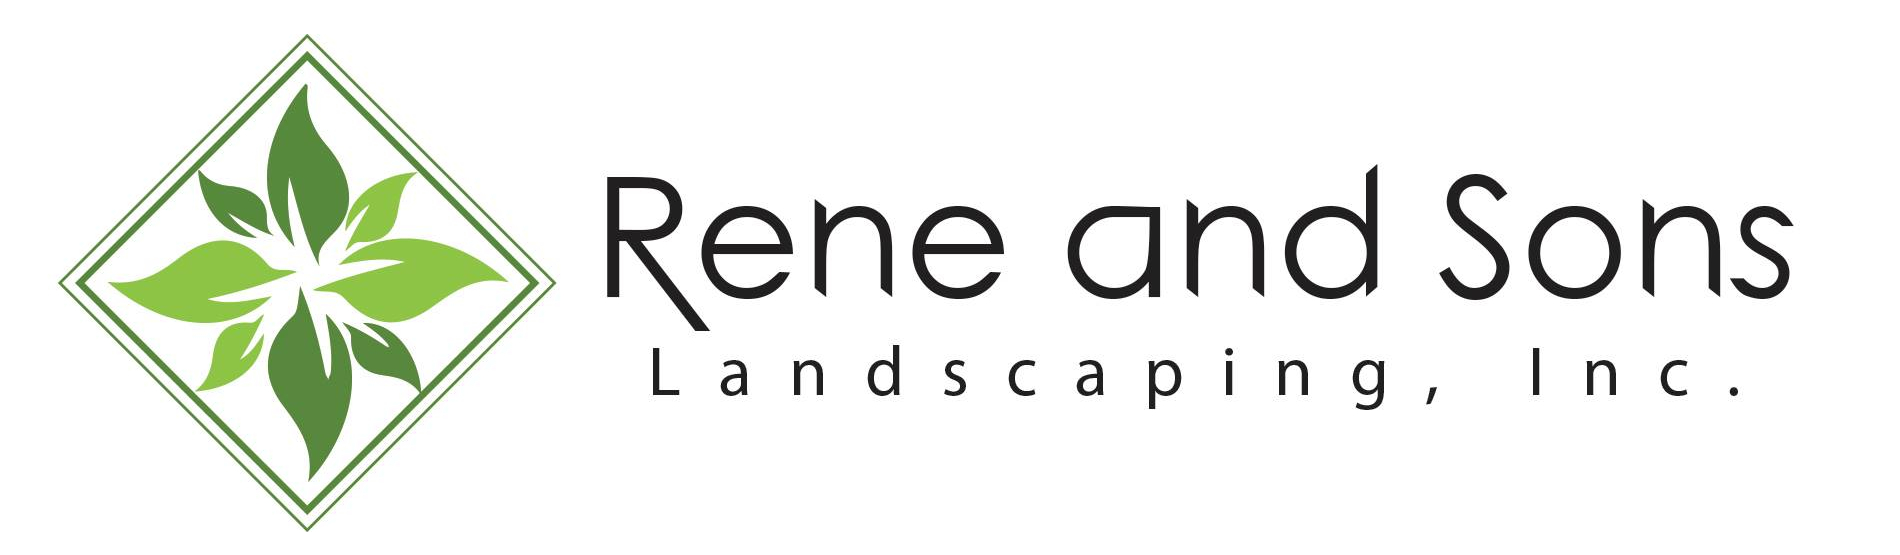 Rene and Sons Landscaping Inc. 